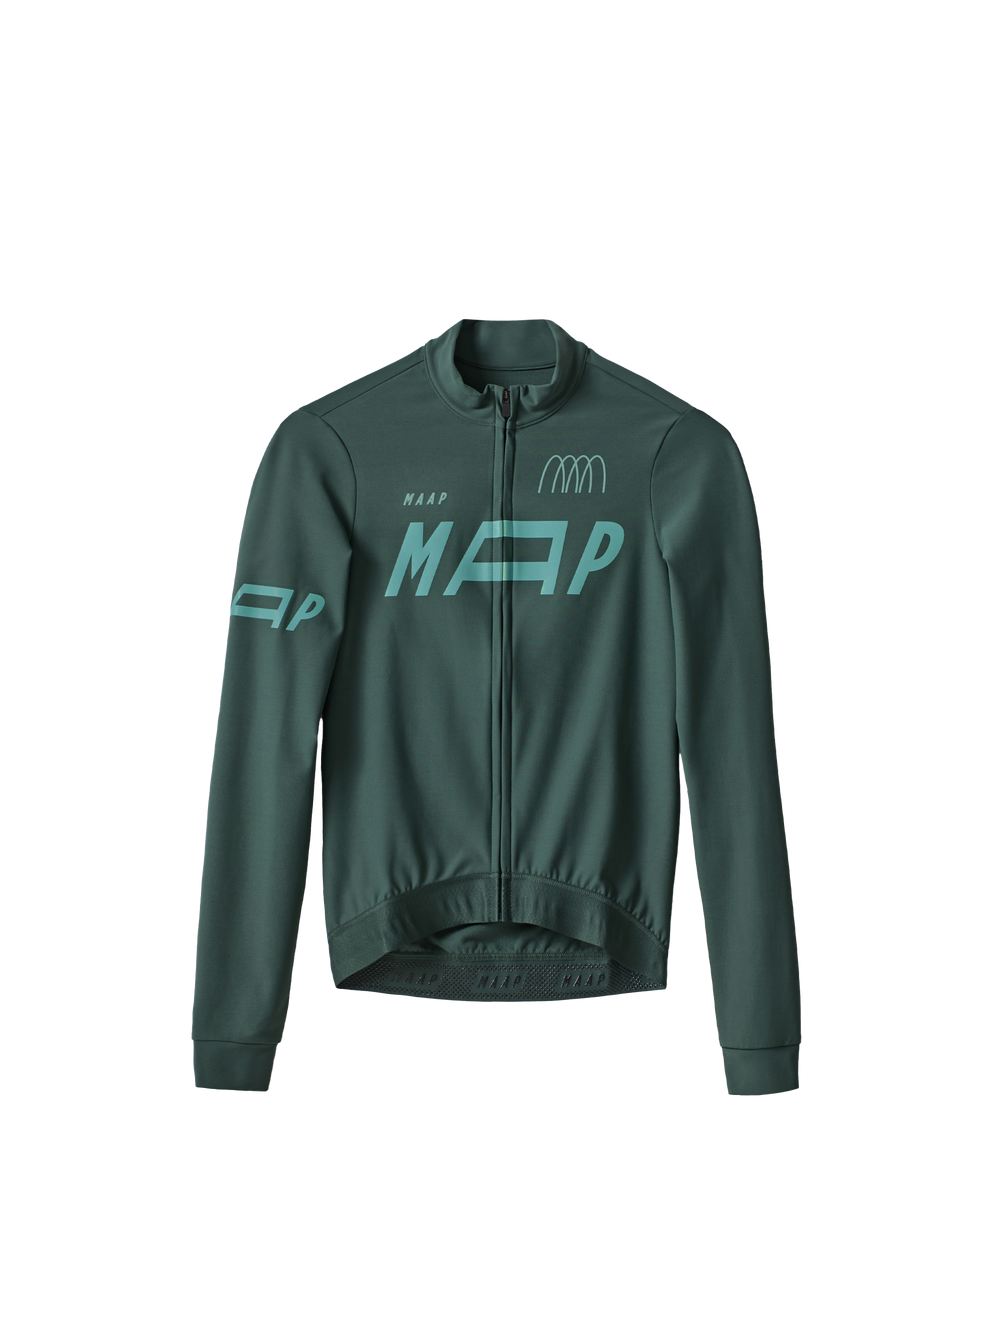 Product Image for Women's Adapt Thermal LS Jersey